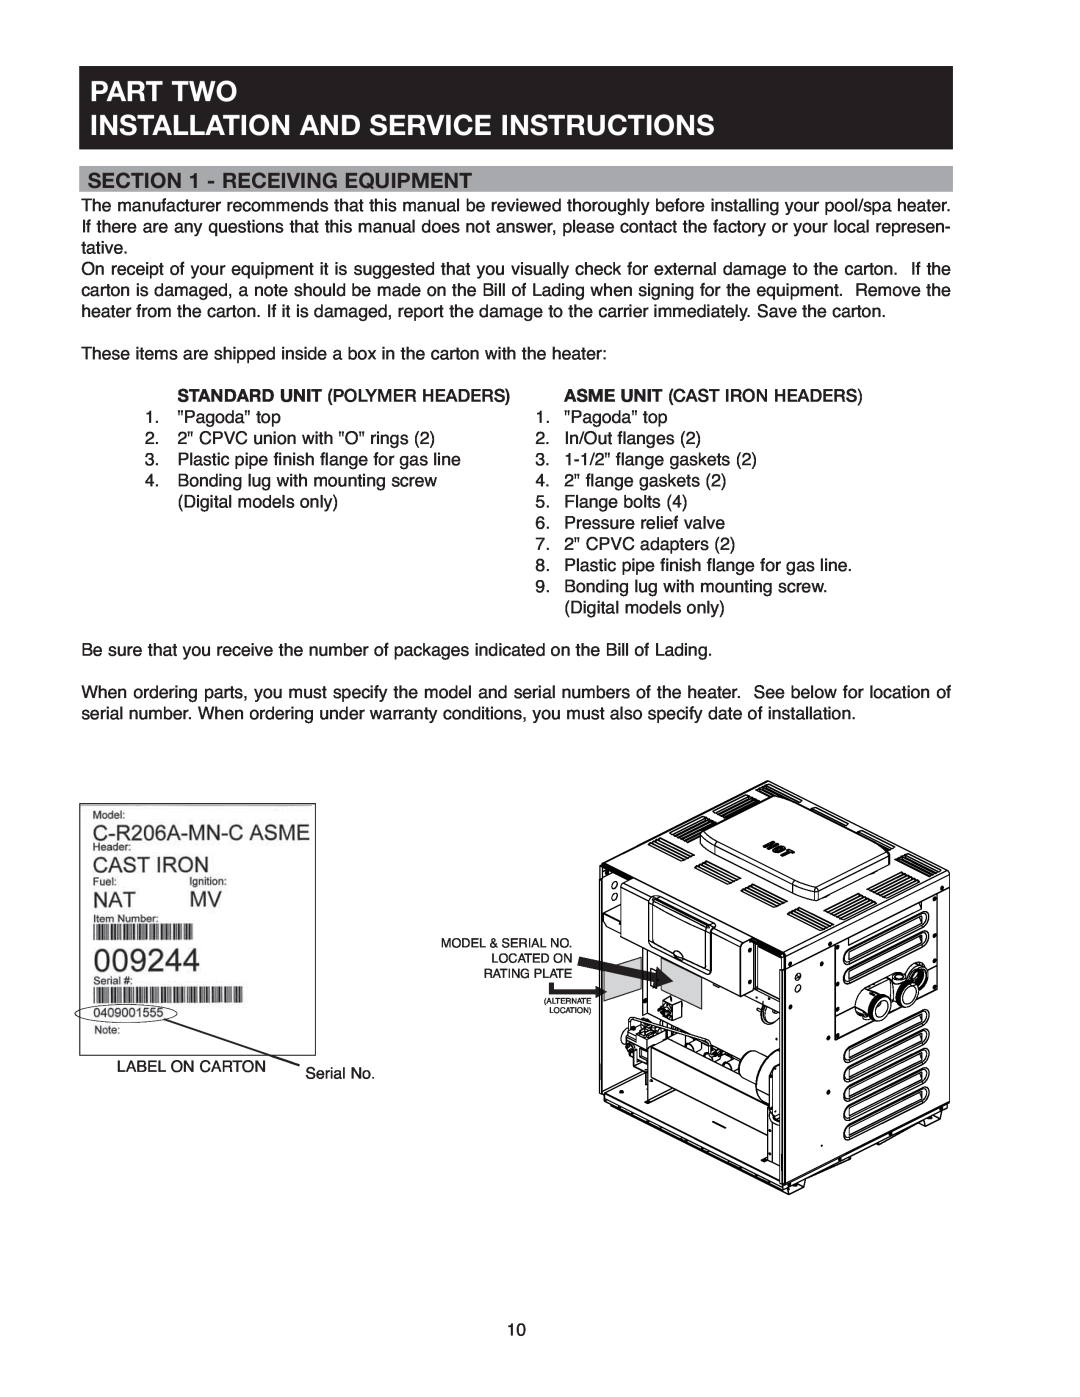 Raypak 407A, 406A, 206A Part Two Installation And Service Instructions, Receiving Equipment, Standard Unit Polymer Headers 